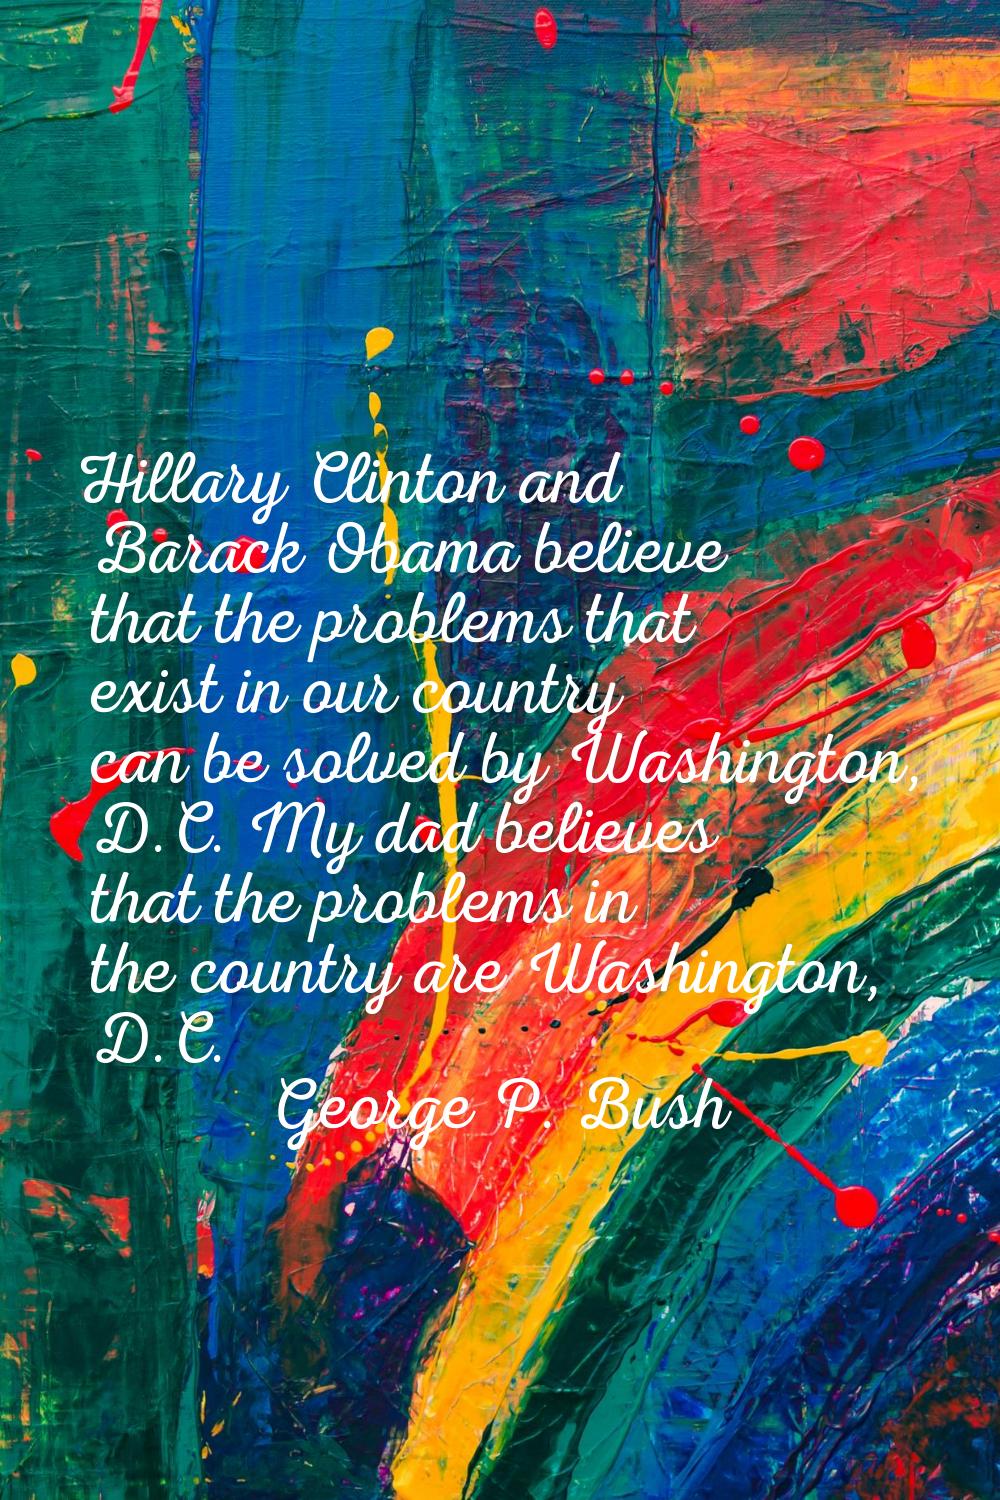 Hillary Clinton and Barack Obama believe that the problems that exist in our country can be solved 